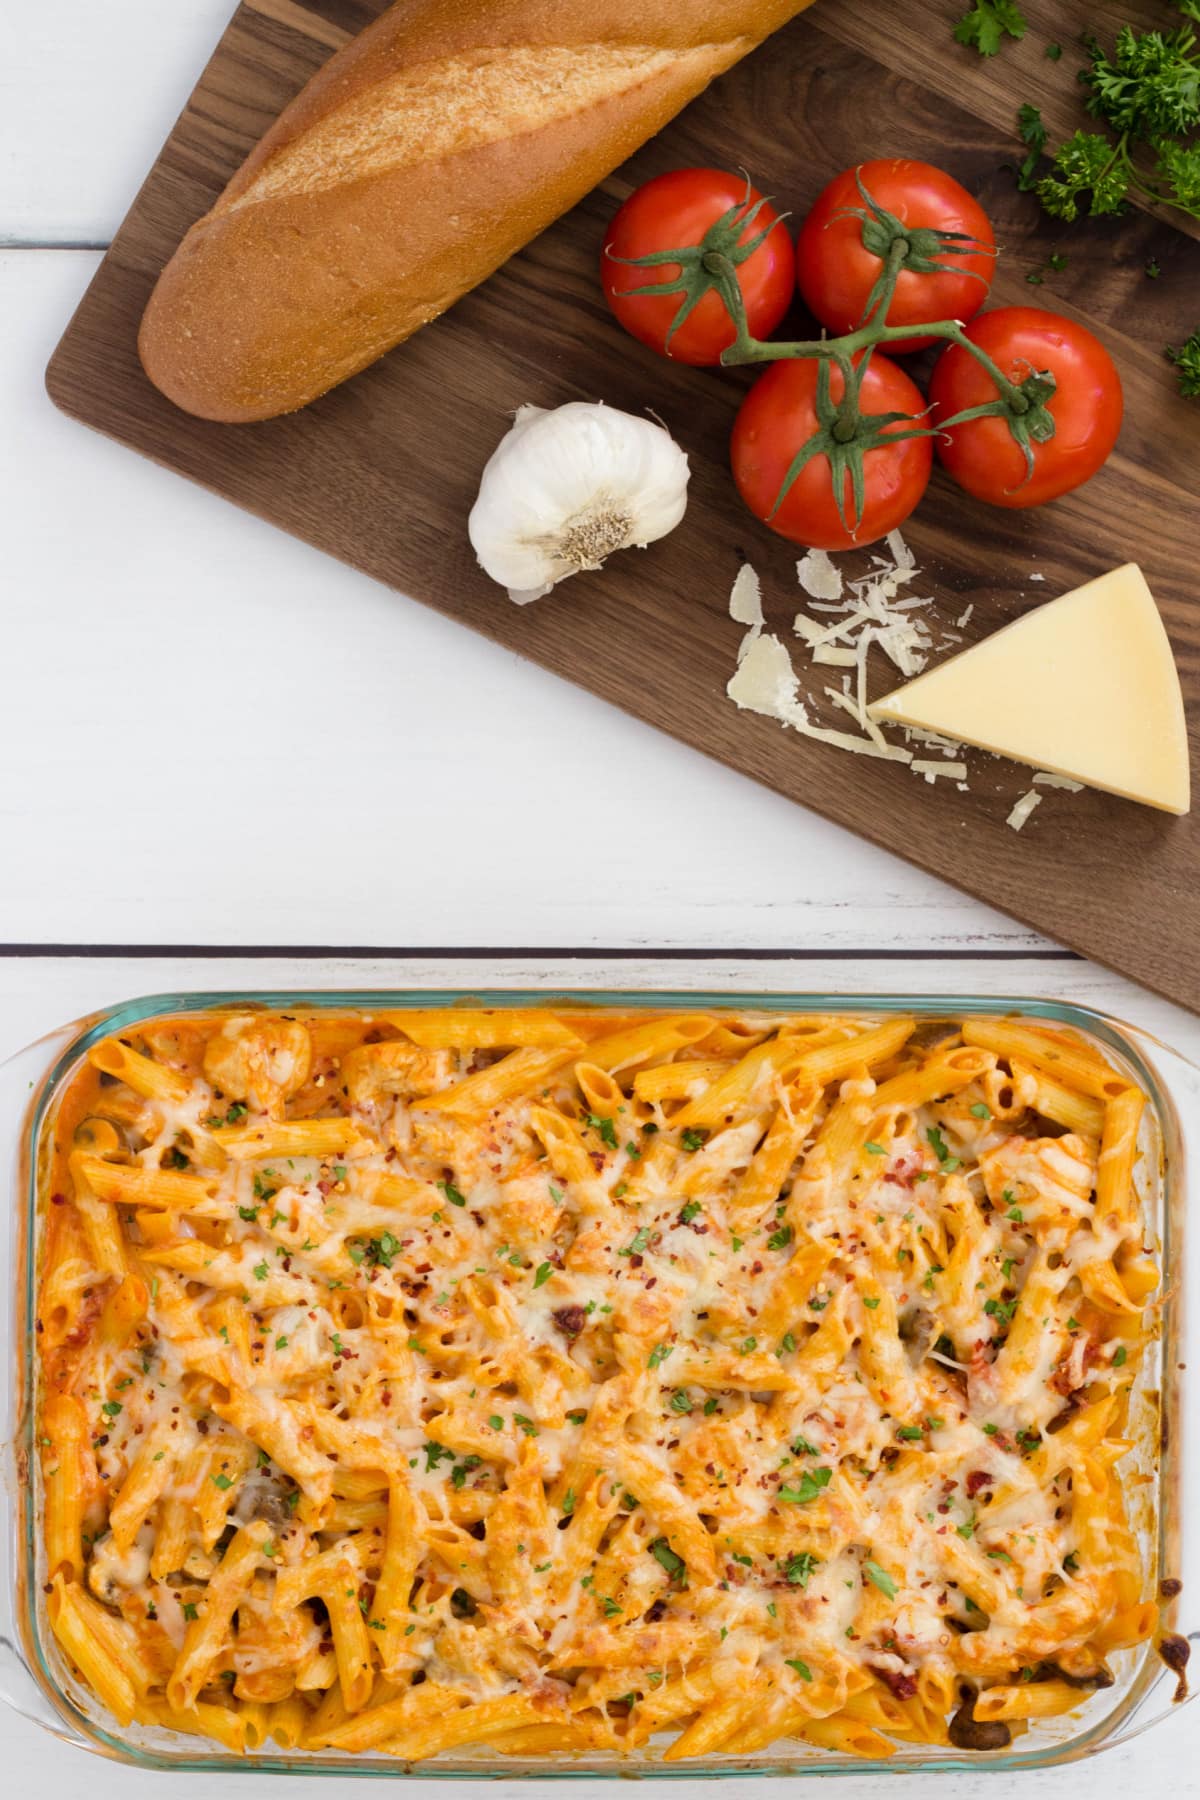 Chicken pasta casserole with ingredients and bread